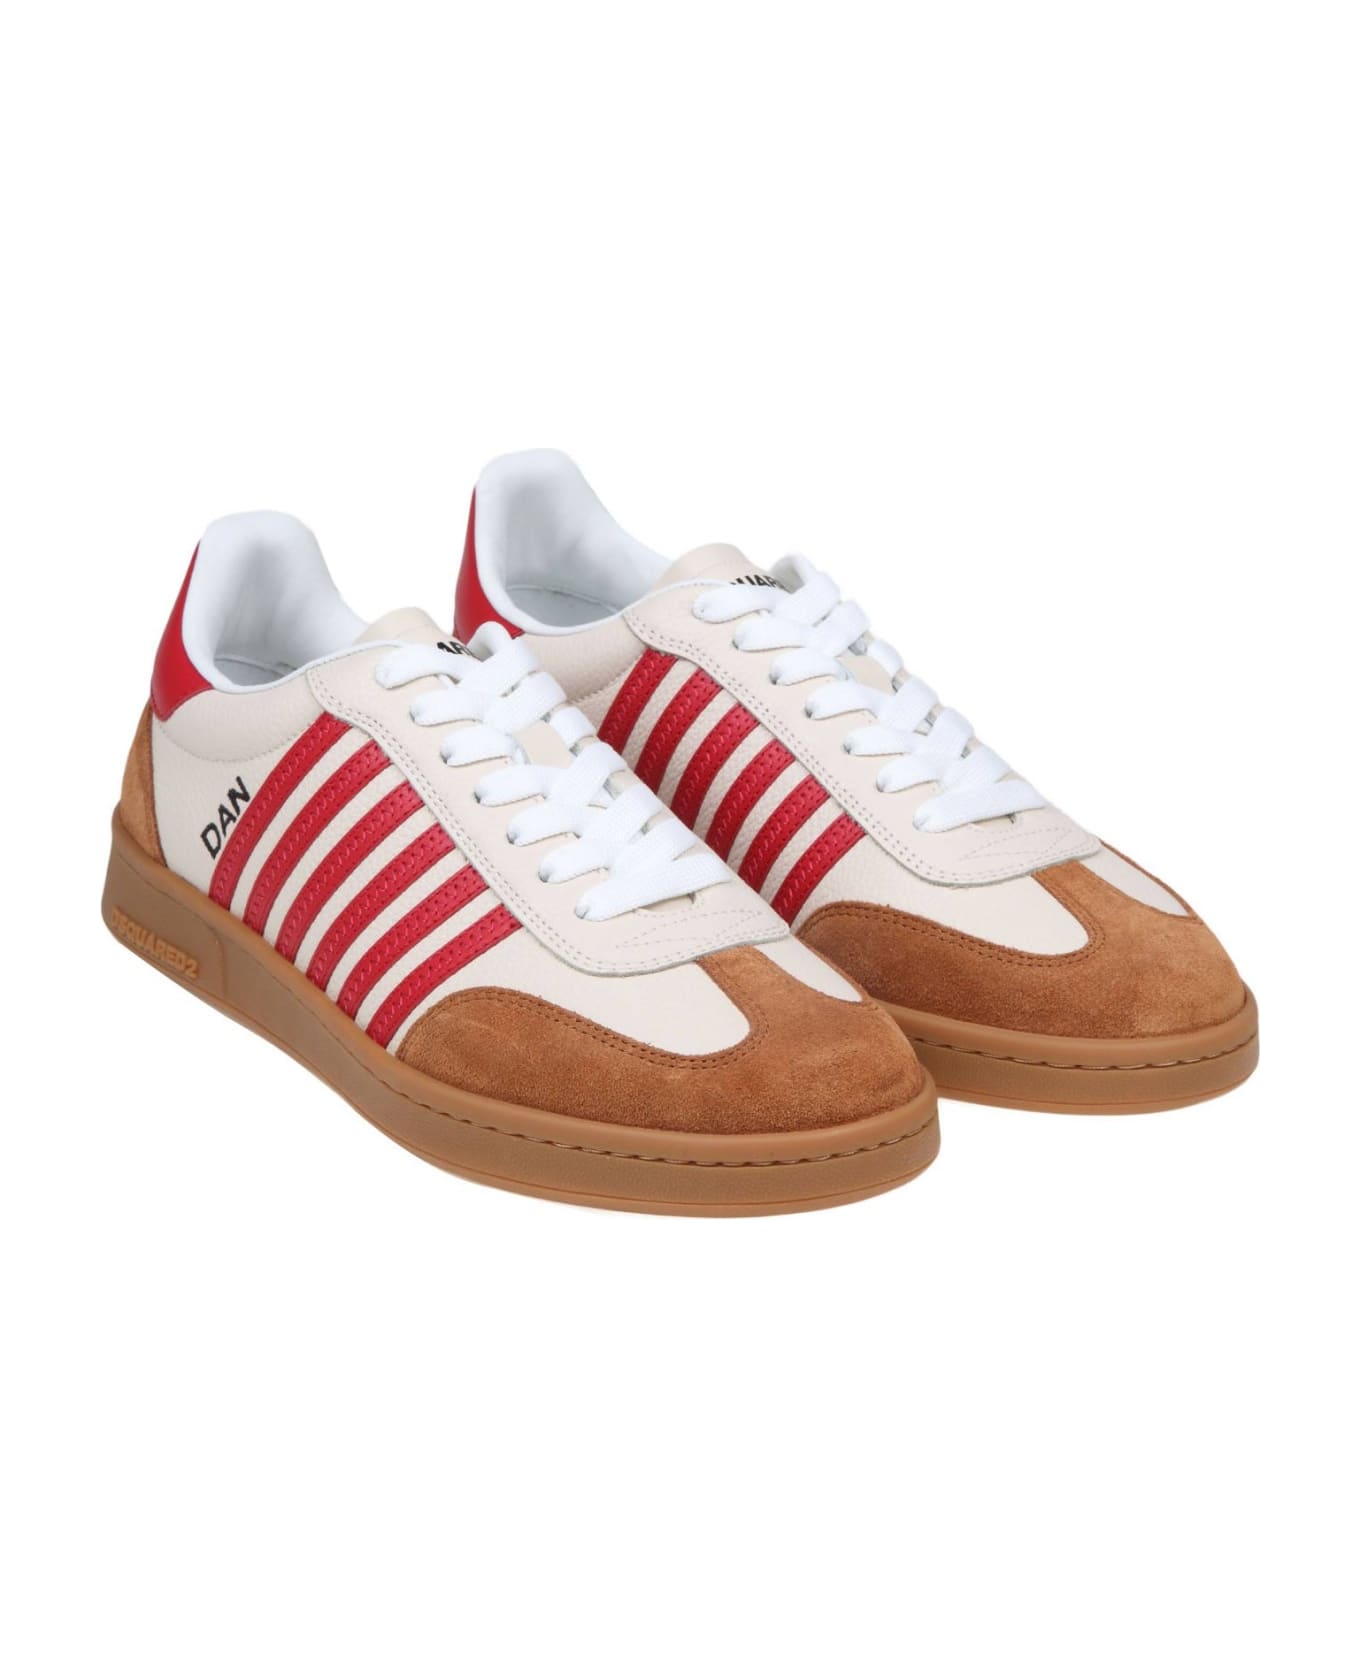 Dsquared2 Boxer Sneakers In White/red Leather And Suede - White/Red スニーカー